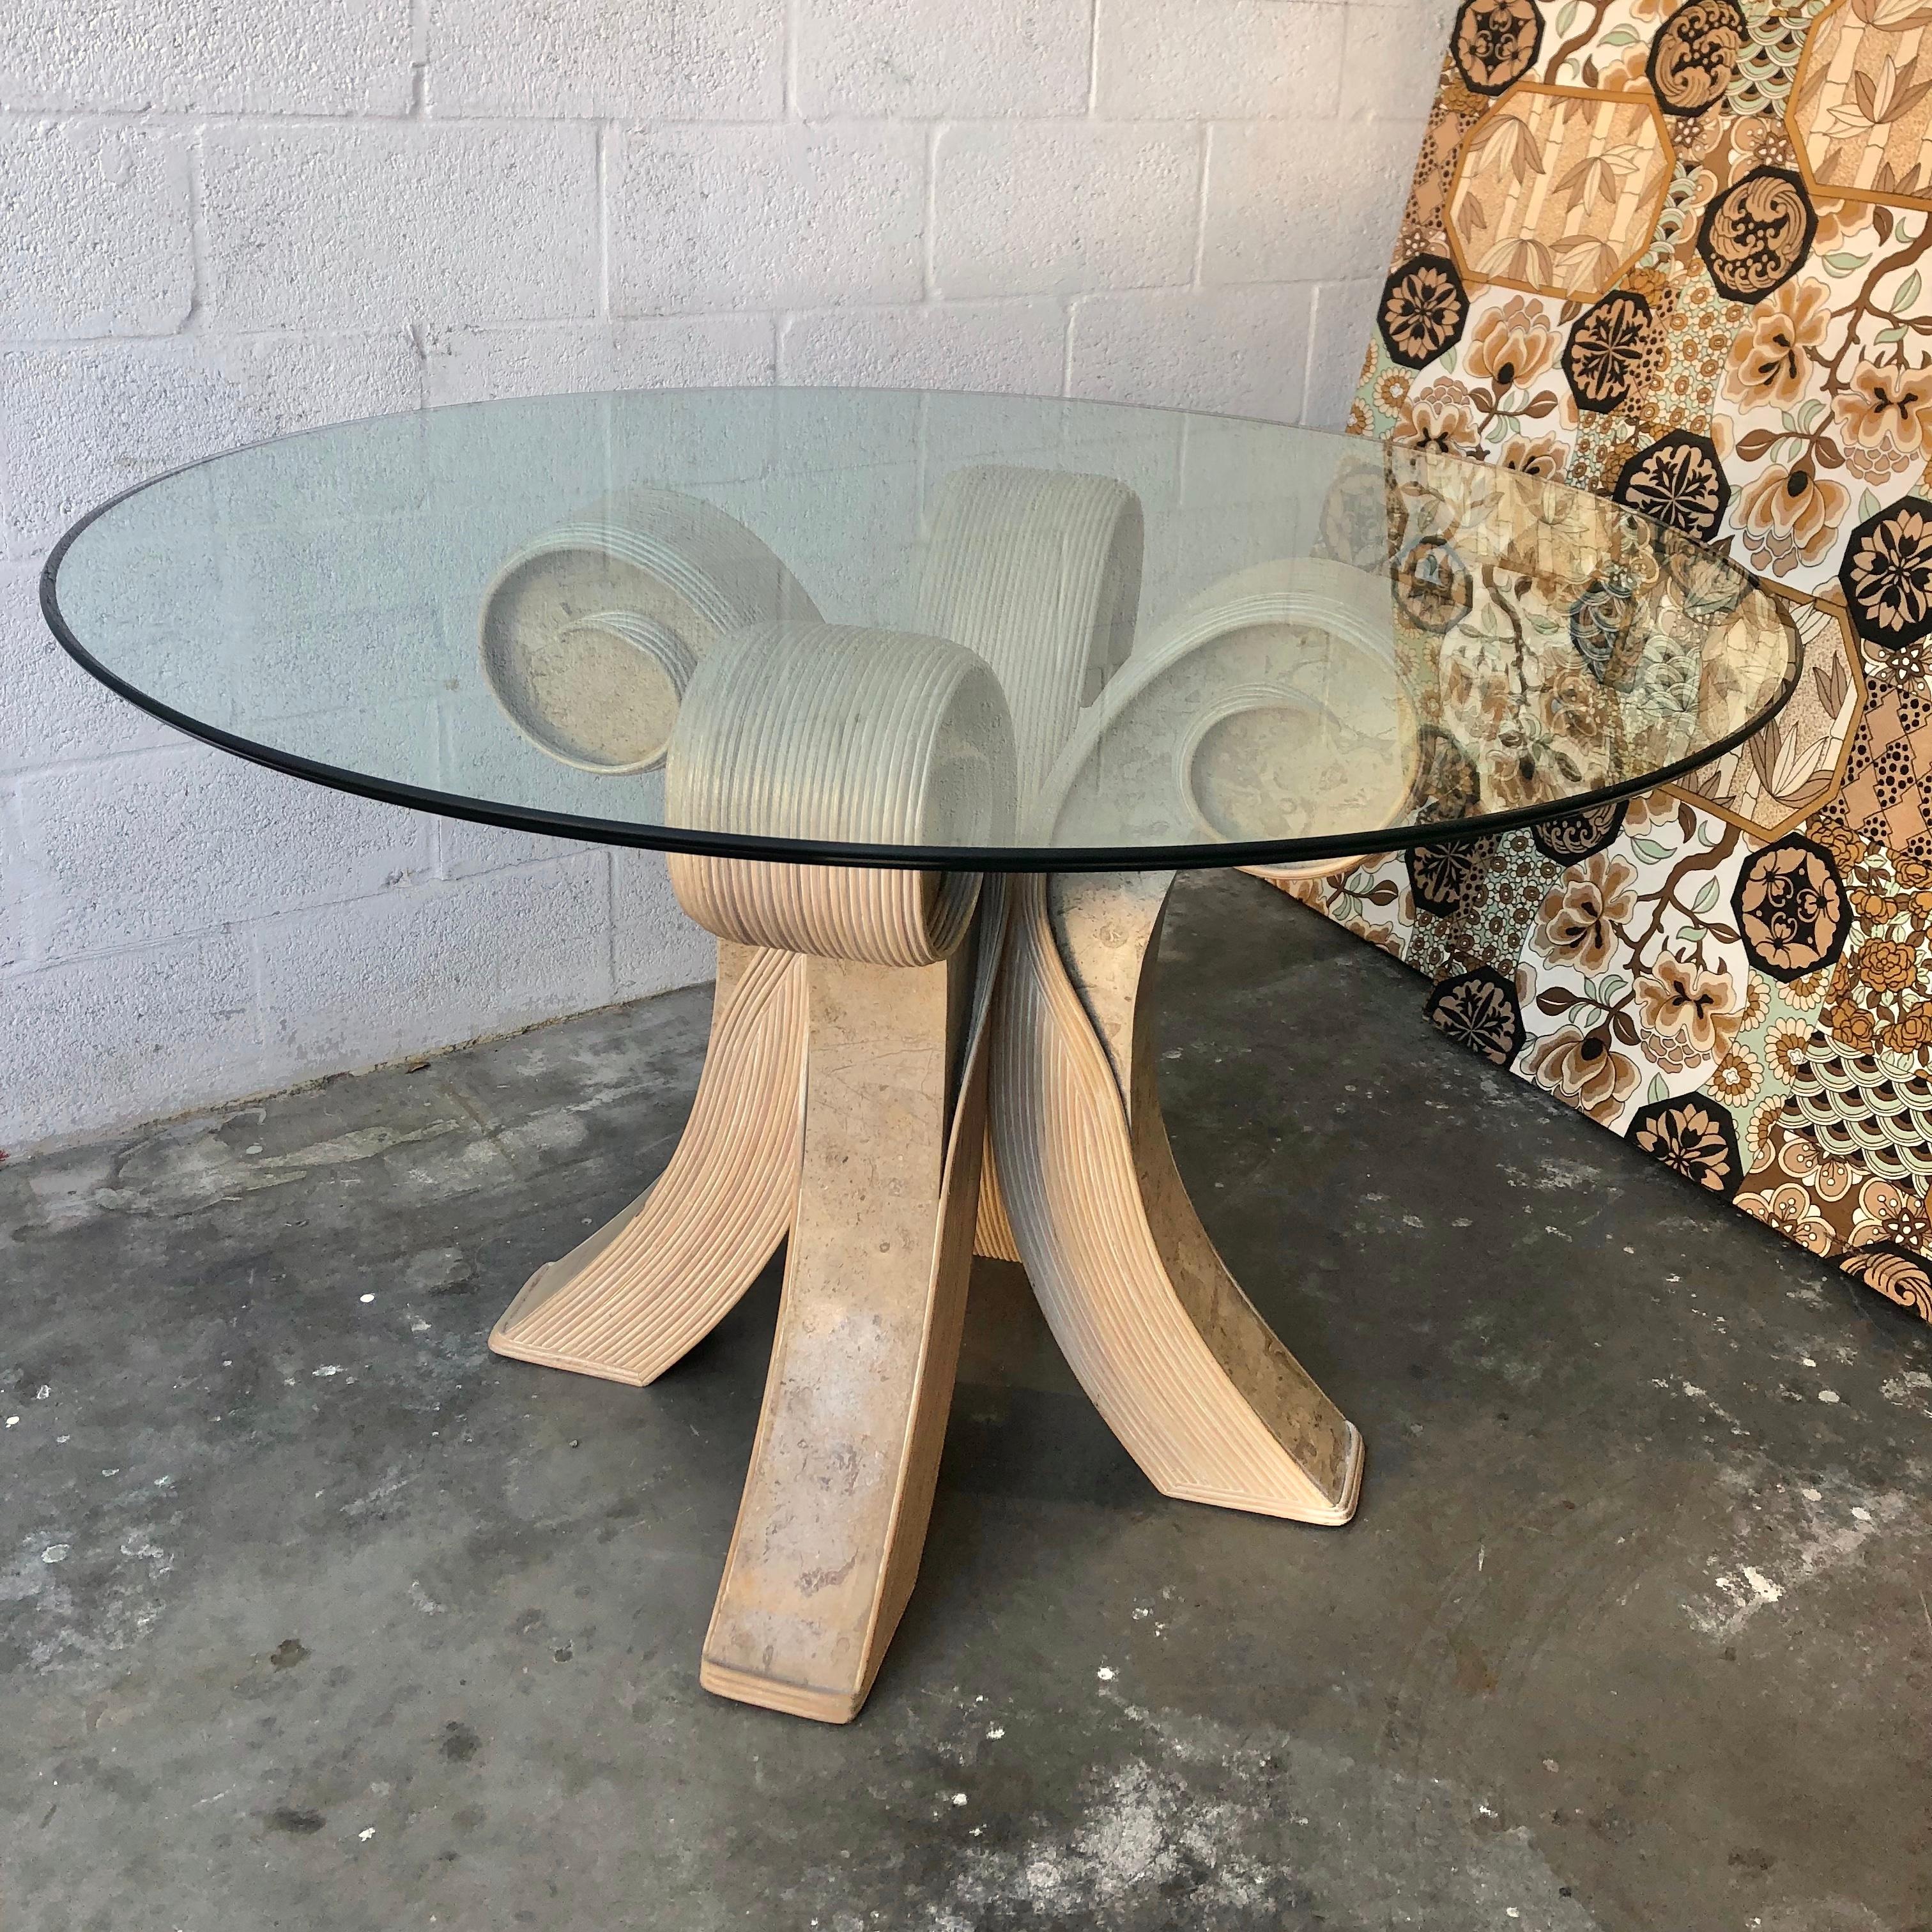 Late 20th century coastal twisted pretzel rattan glass top dining / entry table in the manner of Betty Cobonpue. Dated 1998
Features a beveled glass top and a sculptural pedestal that combines faux stone with cerused finish twisted pretzel rattan.